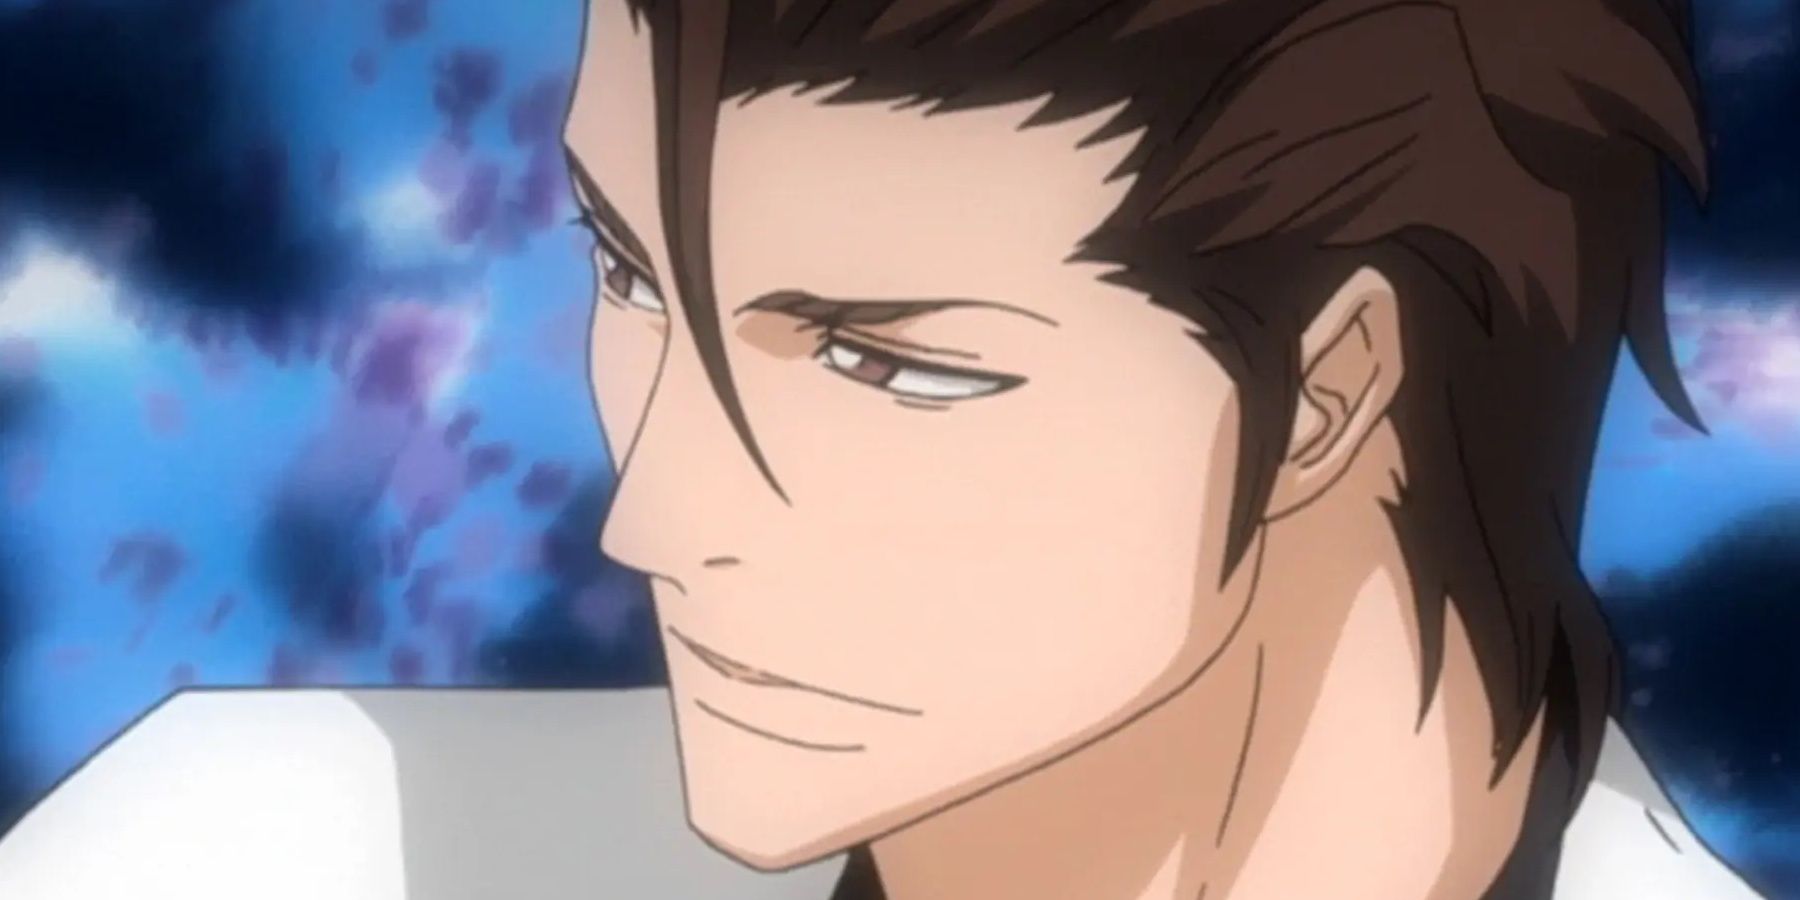 Aizen hair slicked back